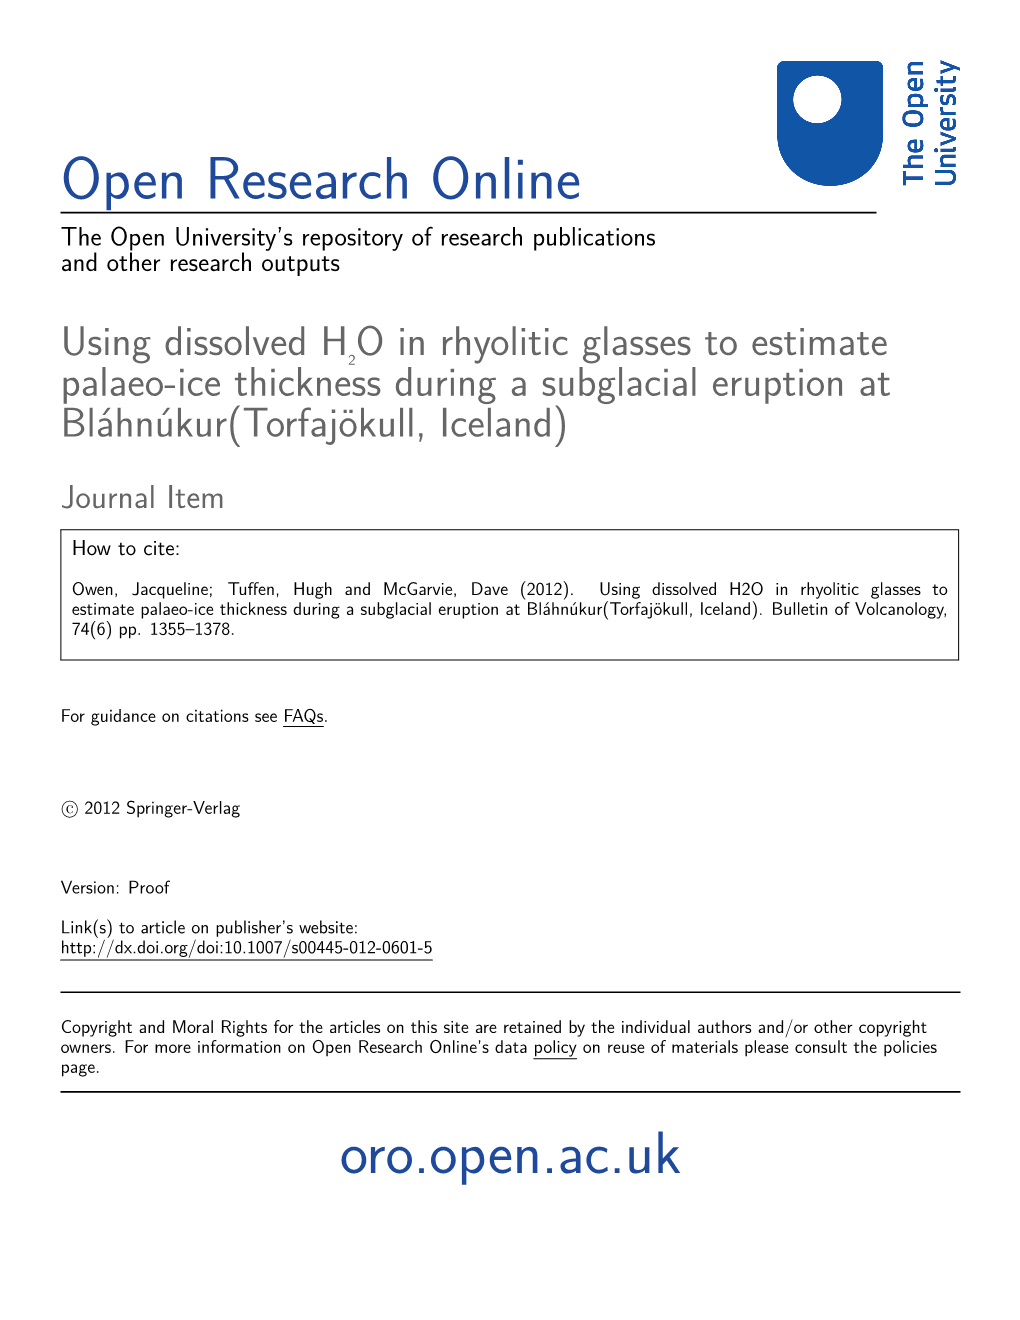 Using Dissolved H2O in Rhyolitic Glasses to Estimate Palaeo-Ice Thickness During a Subglacial Eruption at Bláhnúkur(Torfajökull, Iceland)